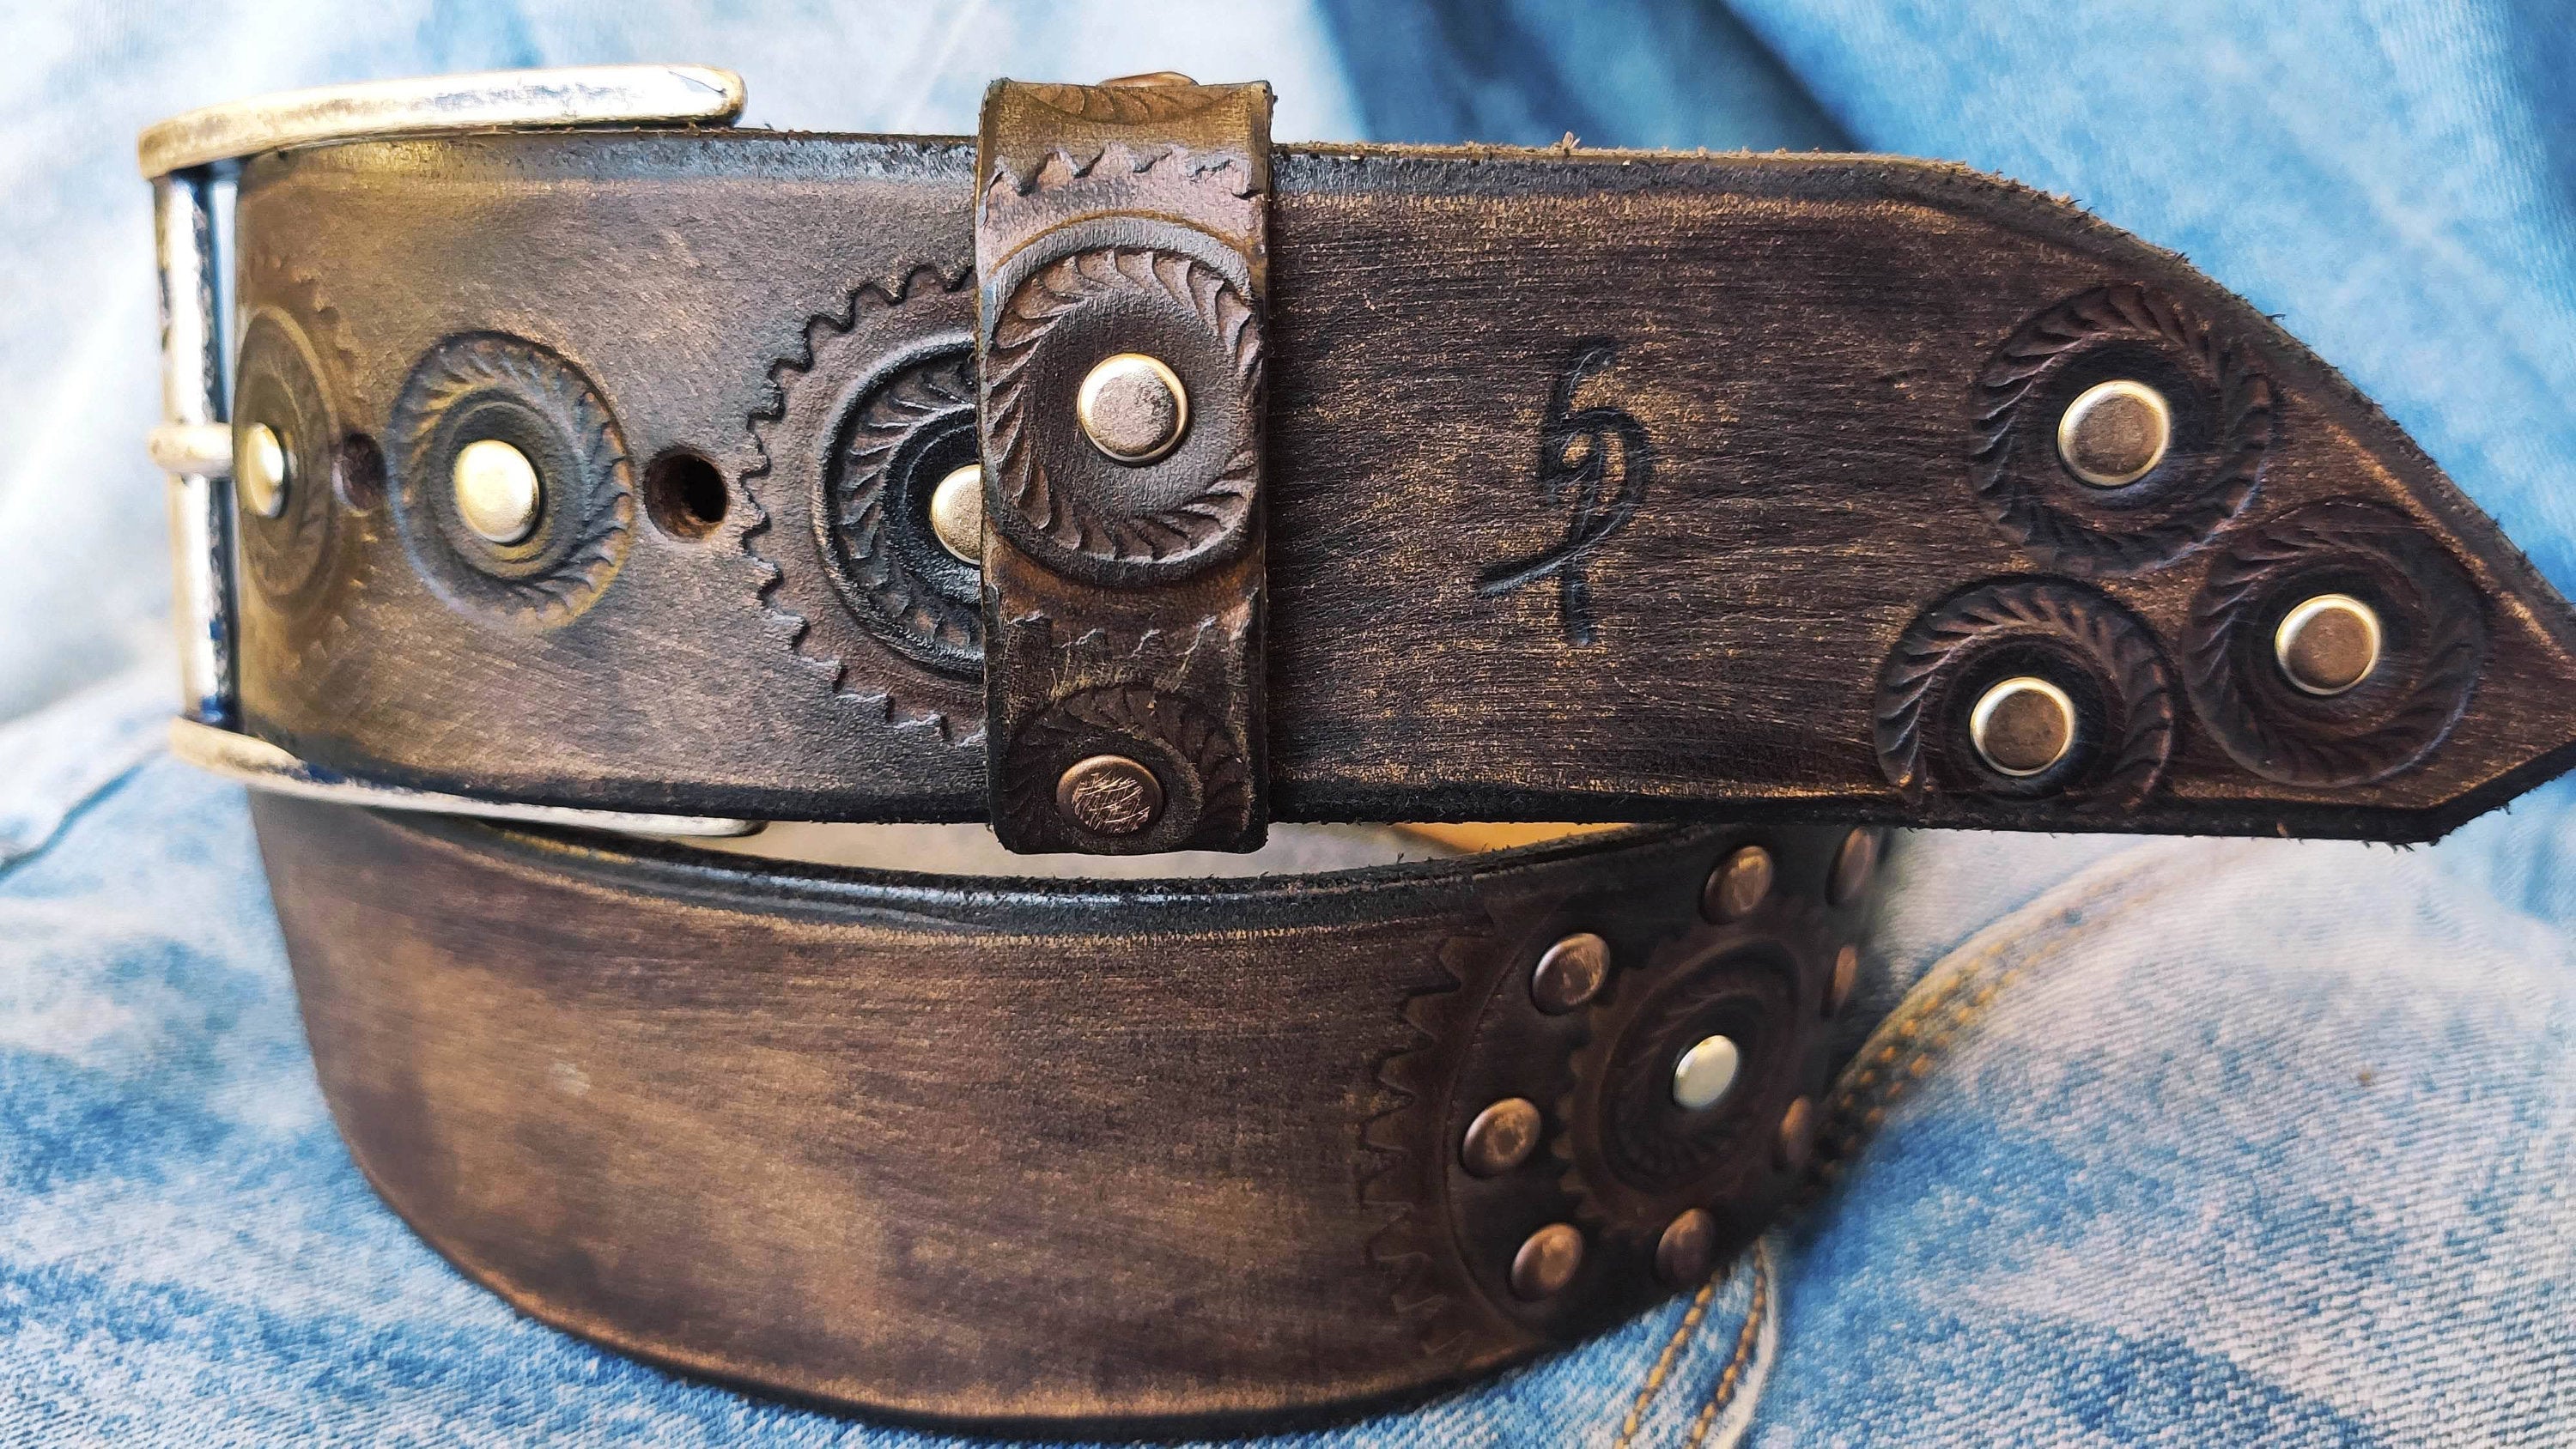 Pin by NK Collections on Men's Belts  Leather belts, Brown leather belt,  Fashion belts